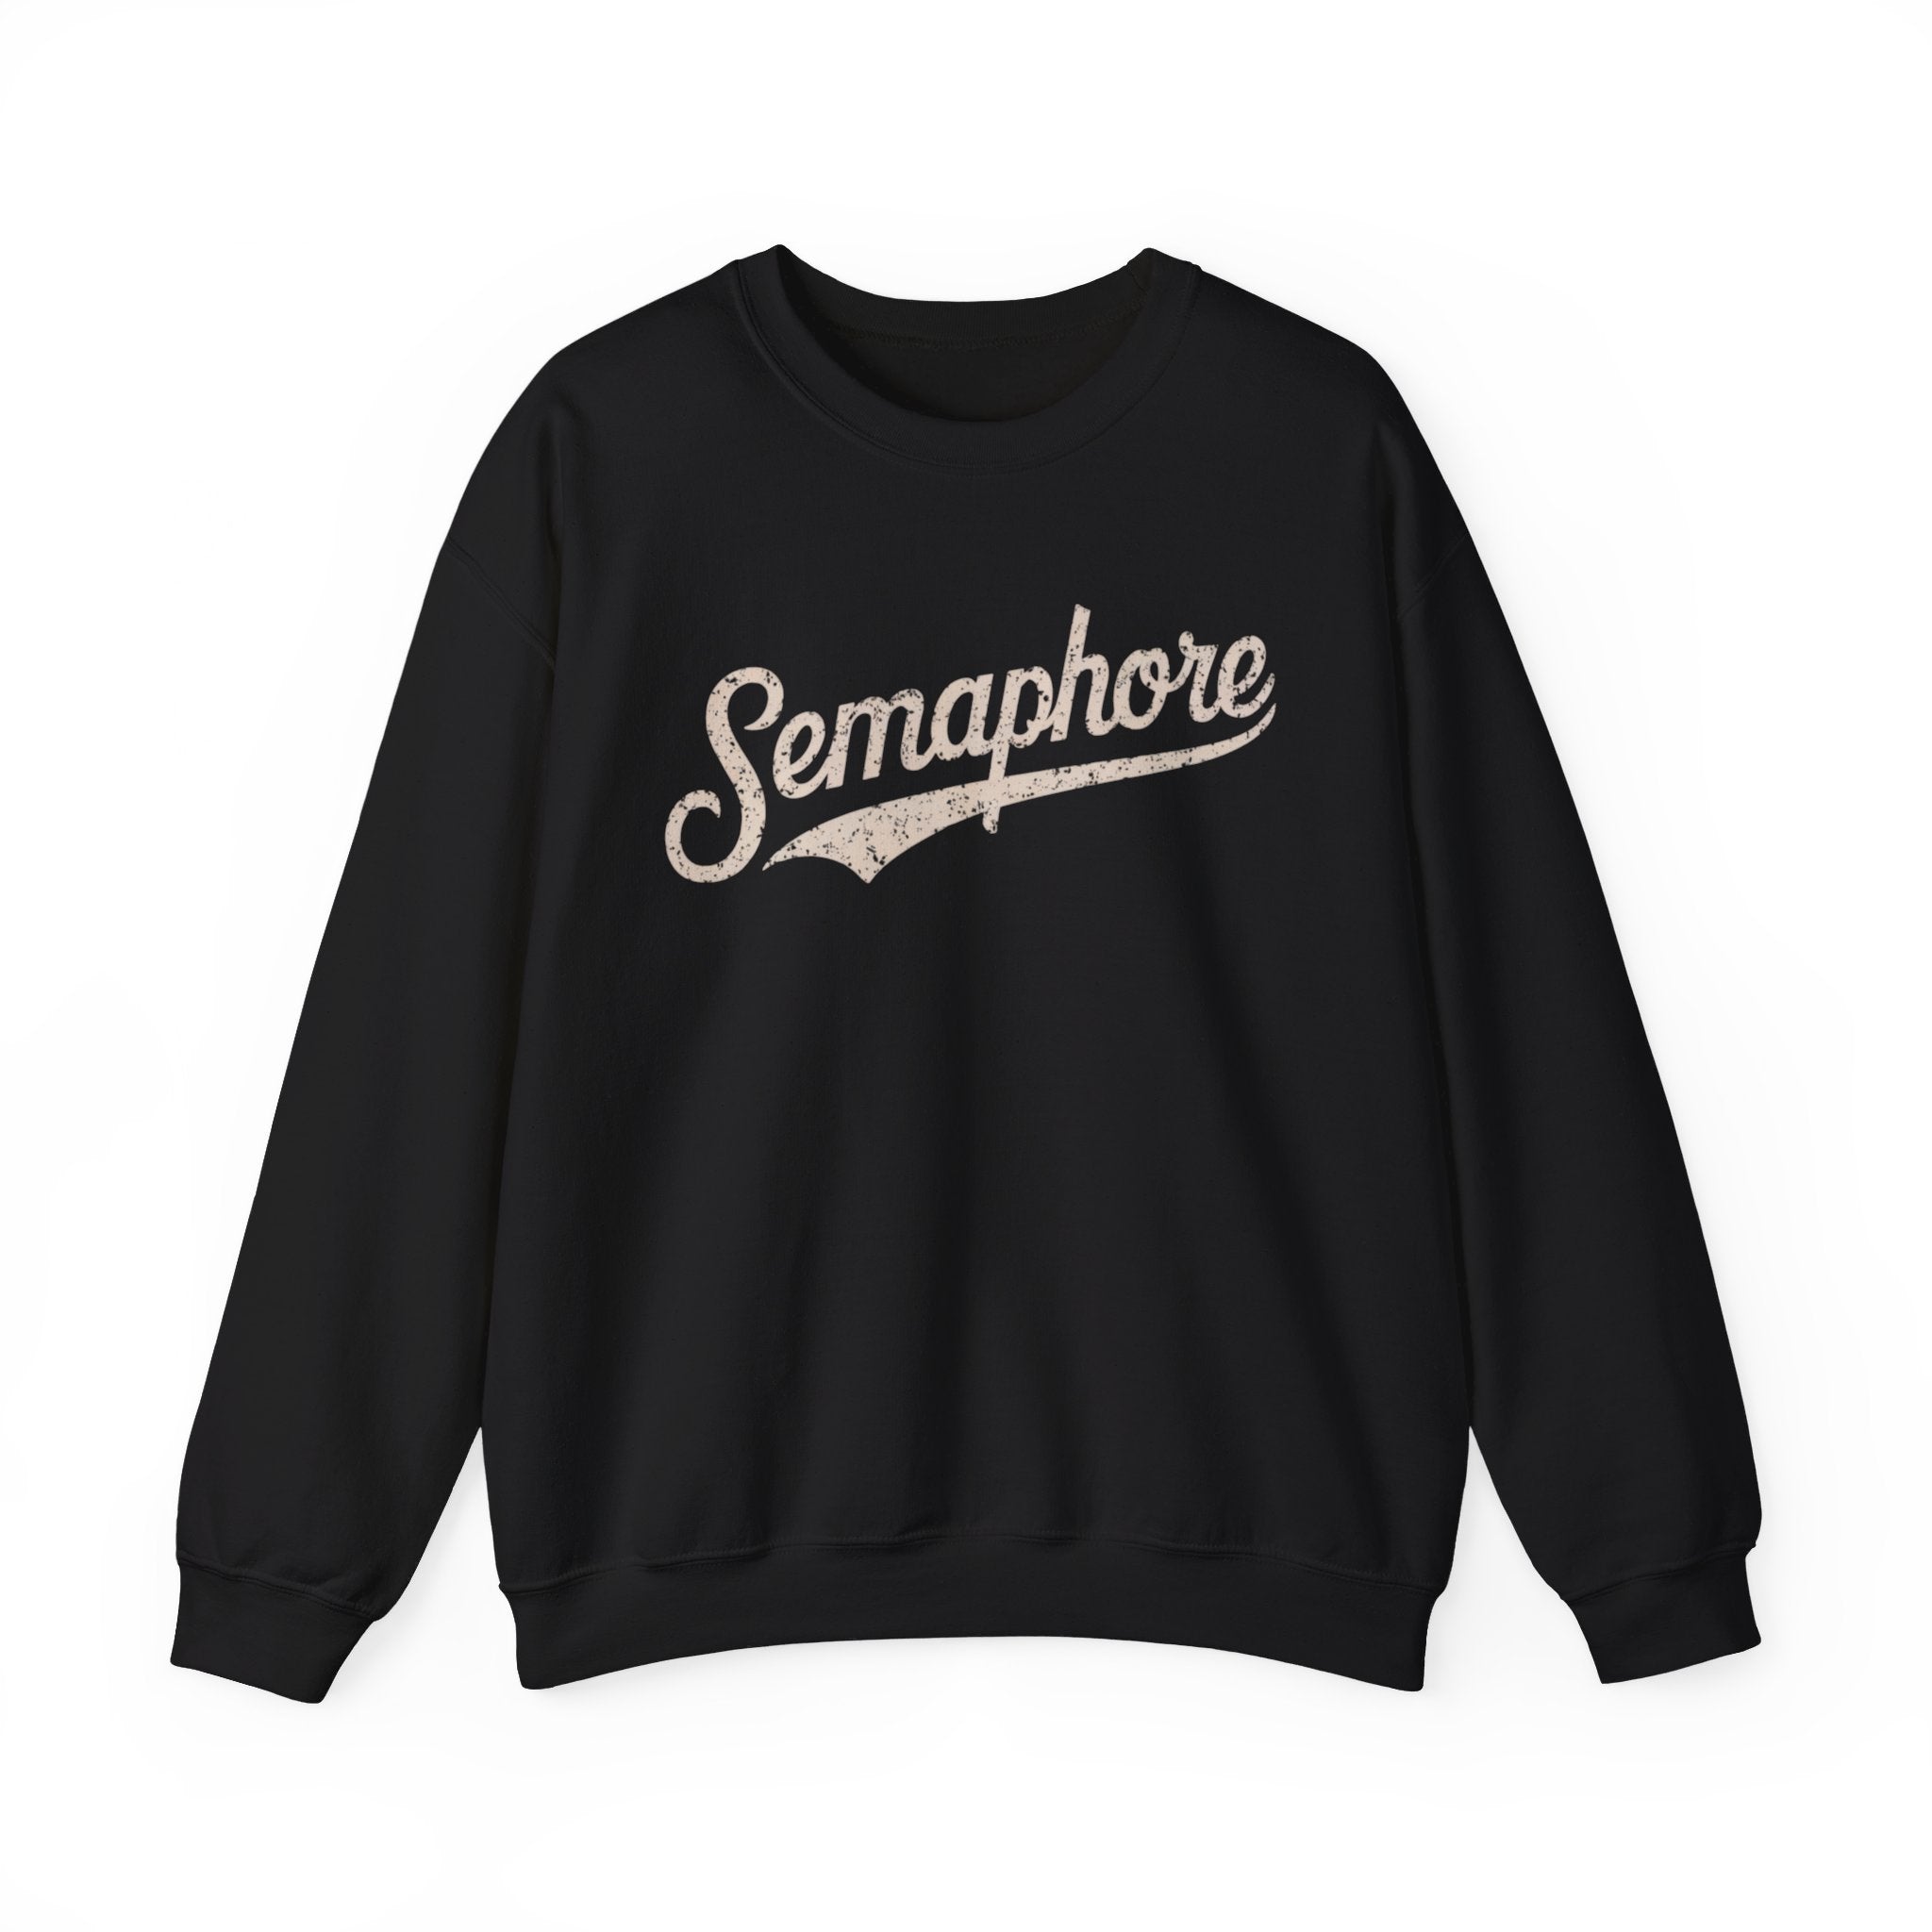 A black Semaphore - Sweatshirt with the word "Semaphore" written in a cursive script across the chest in a vintage style, perfect for adding both style and warmth during chillier weather.